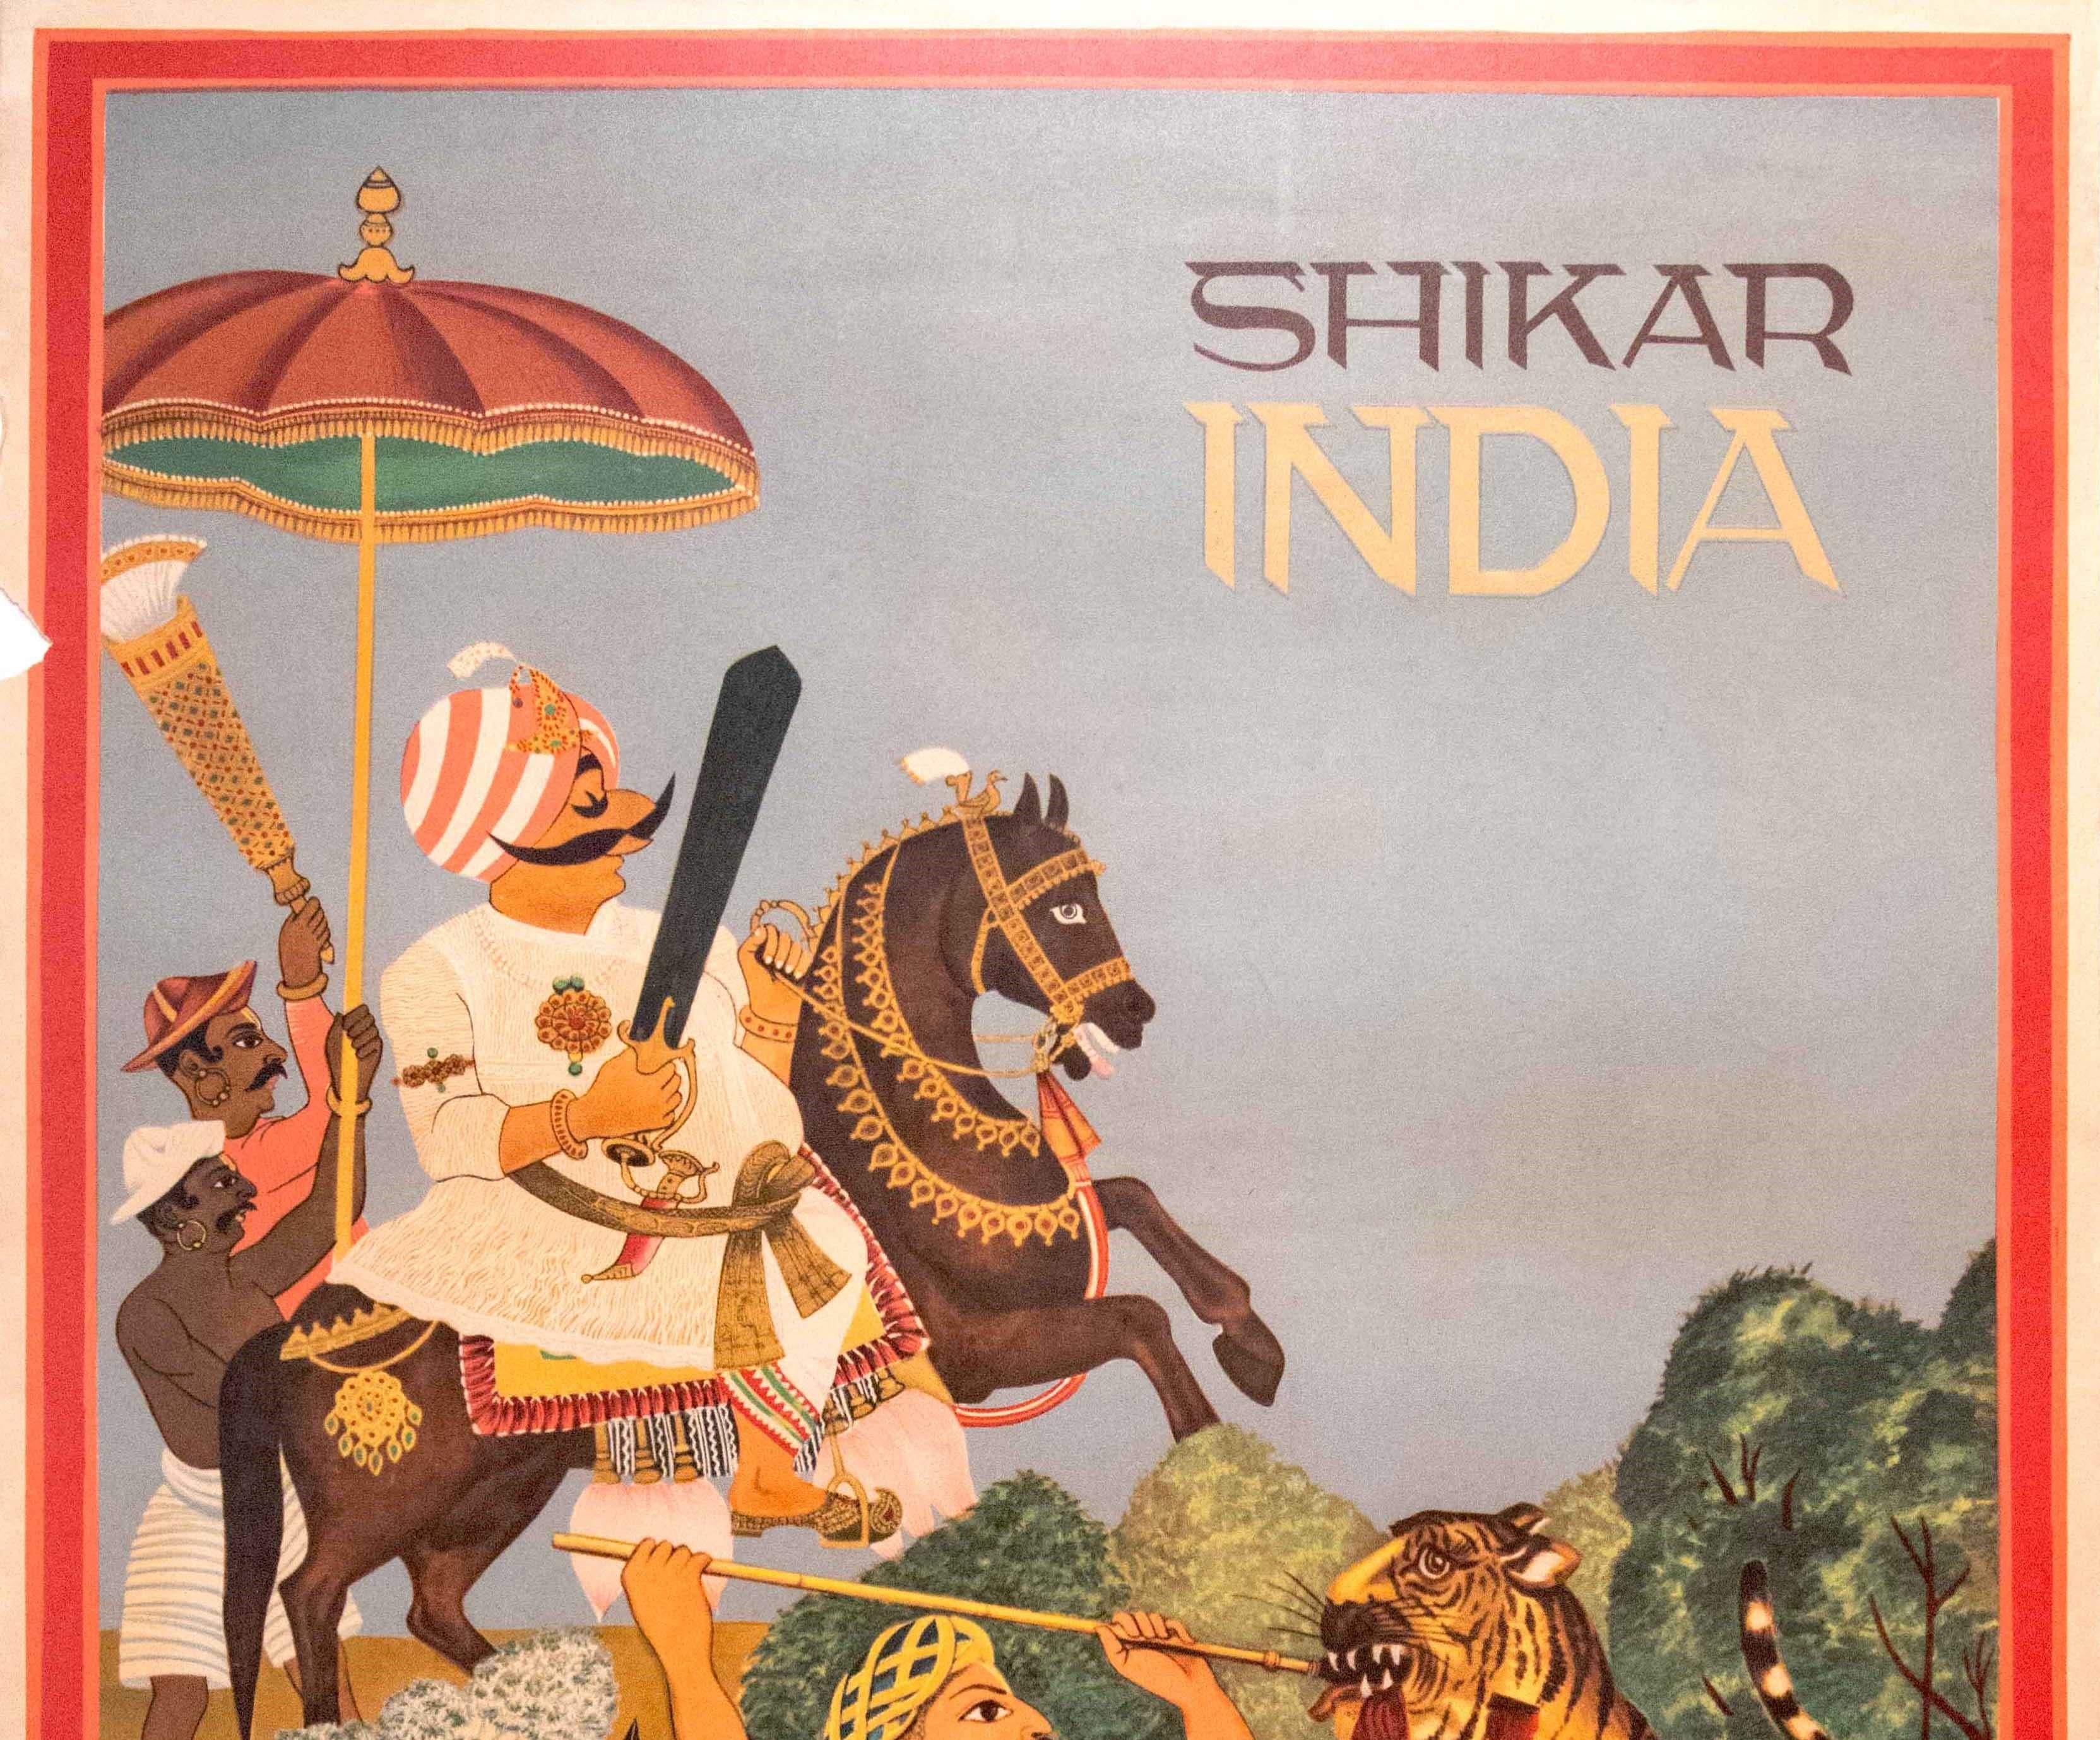 Original vintage Air-India travel poster titled Shikar India featuring a stunning illustration adapted from an old Indian painting depicting the Air India mascot - the Maharaja (created in 1946 by Bobby Kooka and Umesh Rao) - riding a horse with a